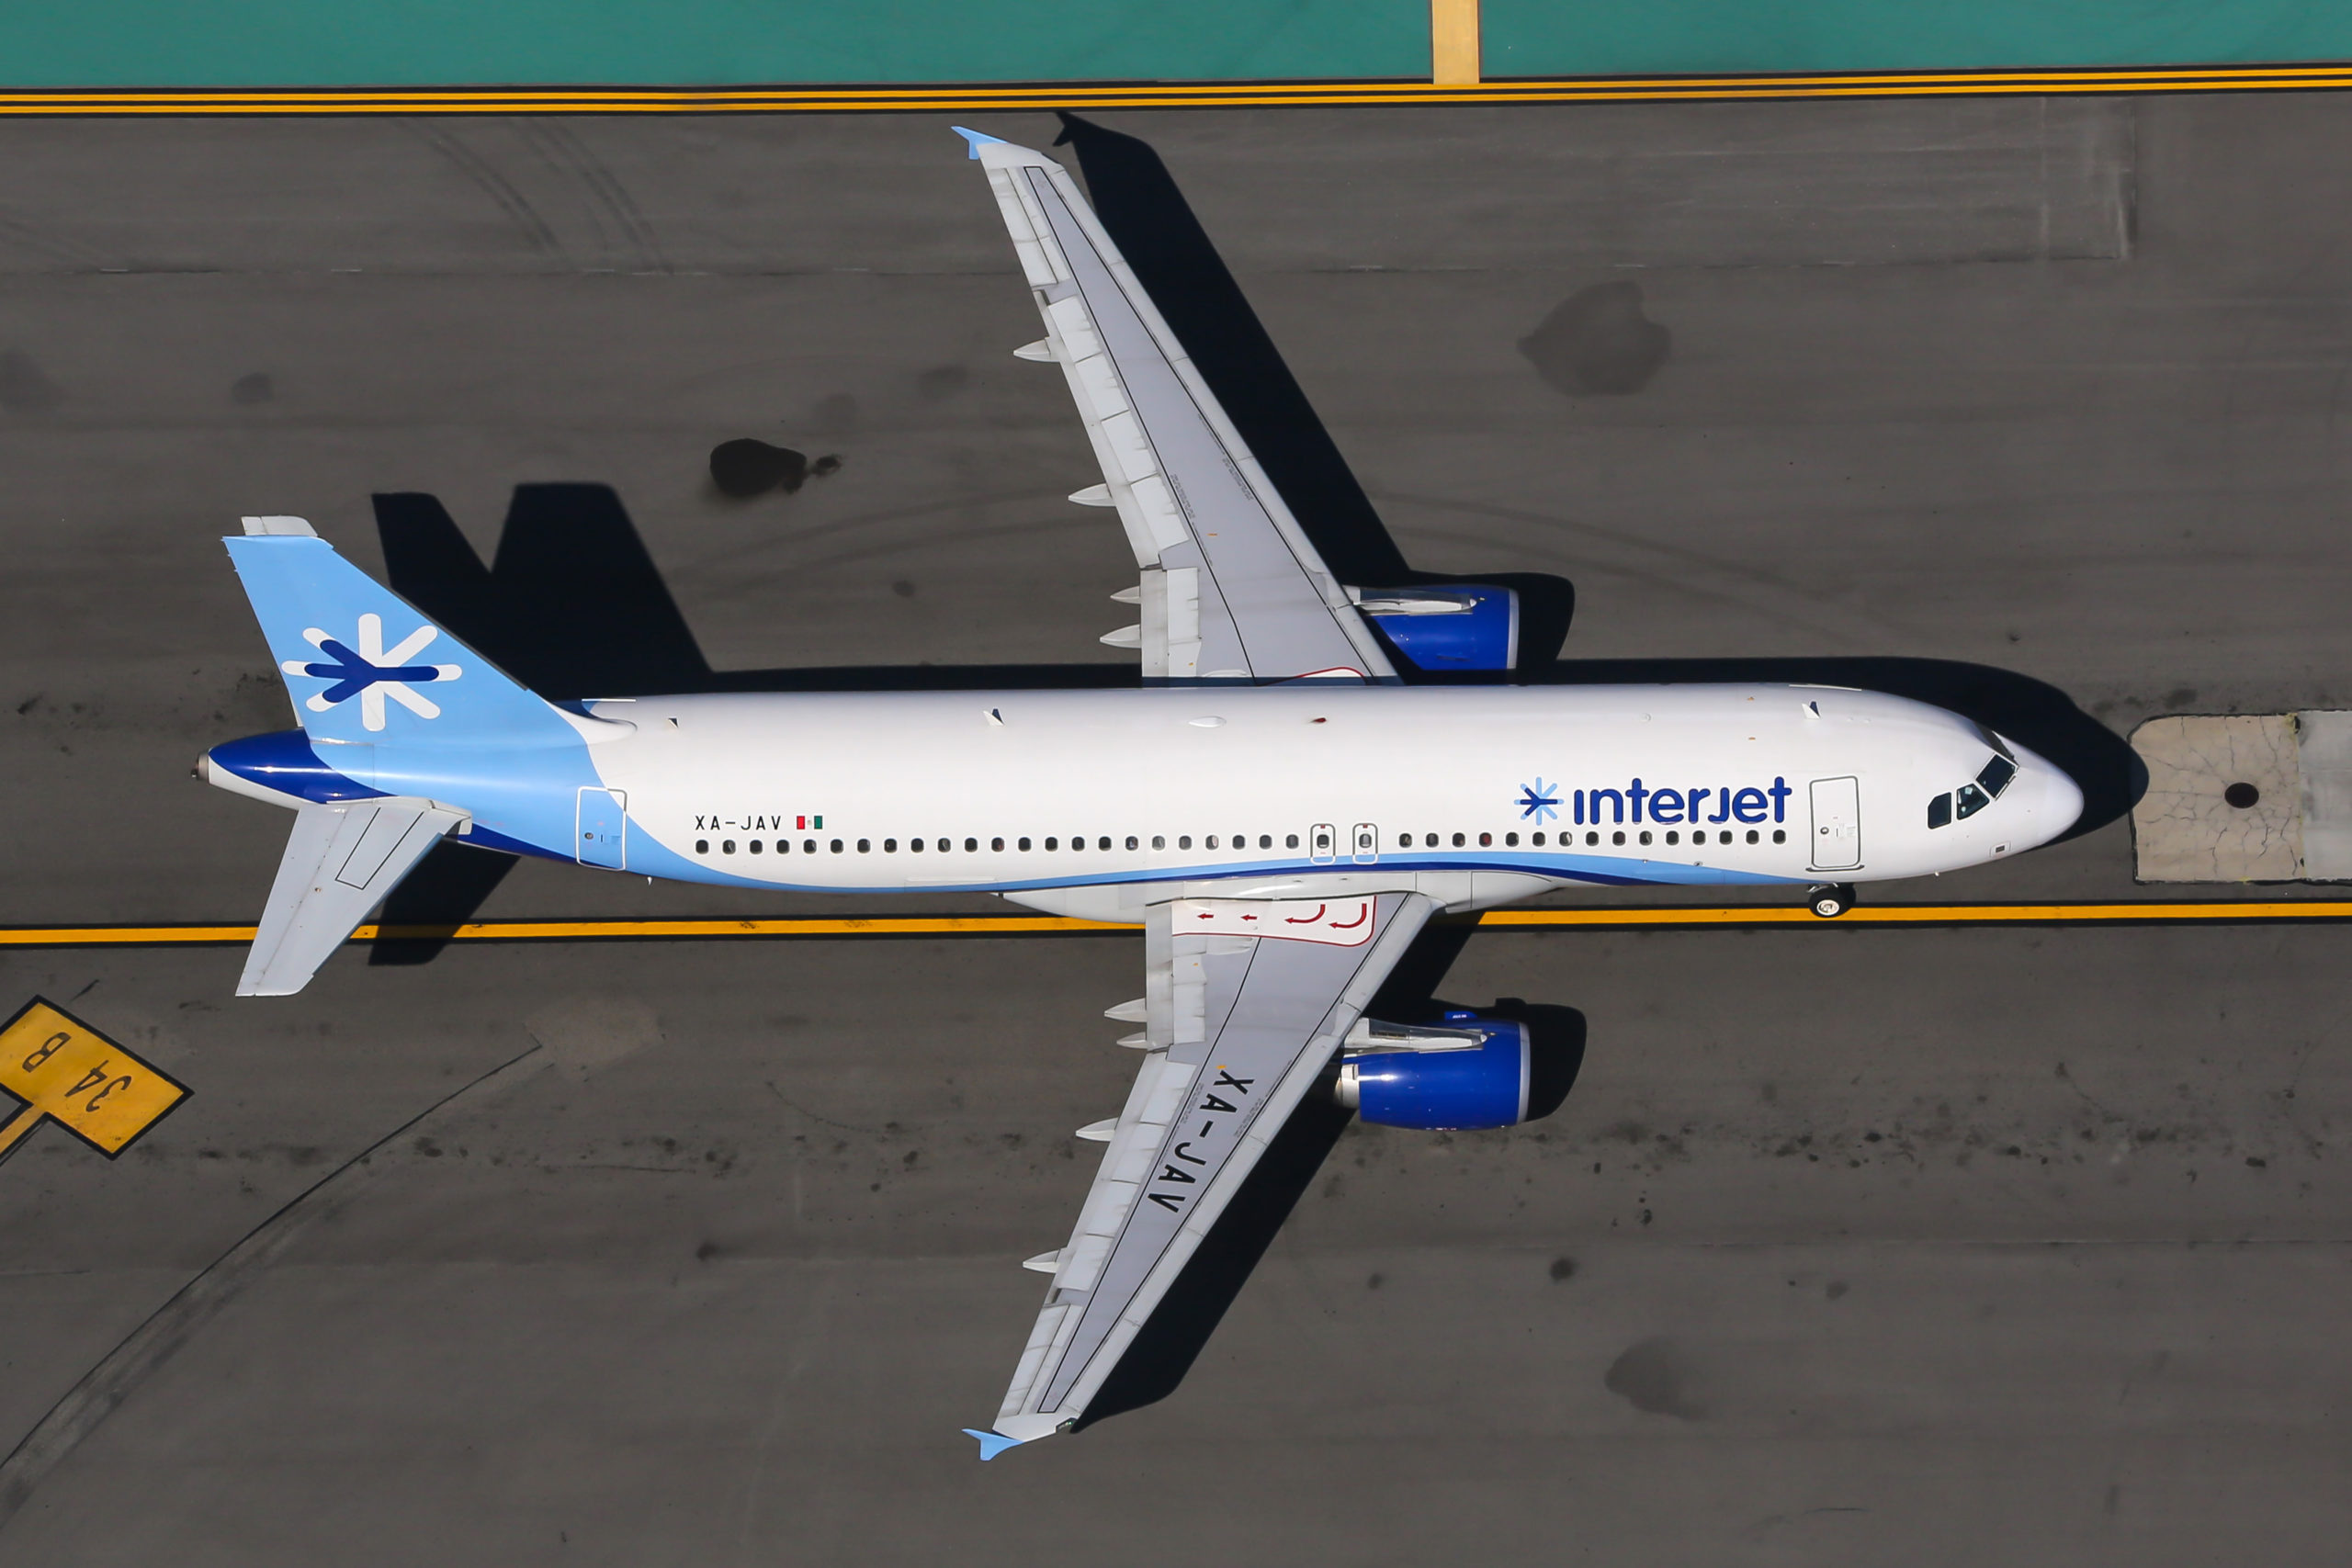 Interjet will likely cease operations in the coming weeks.